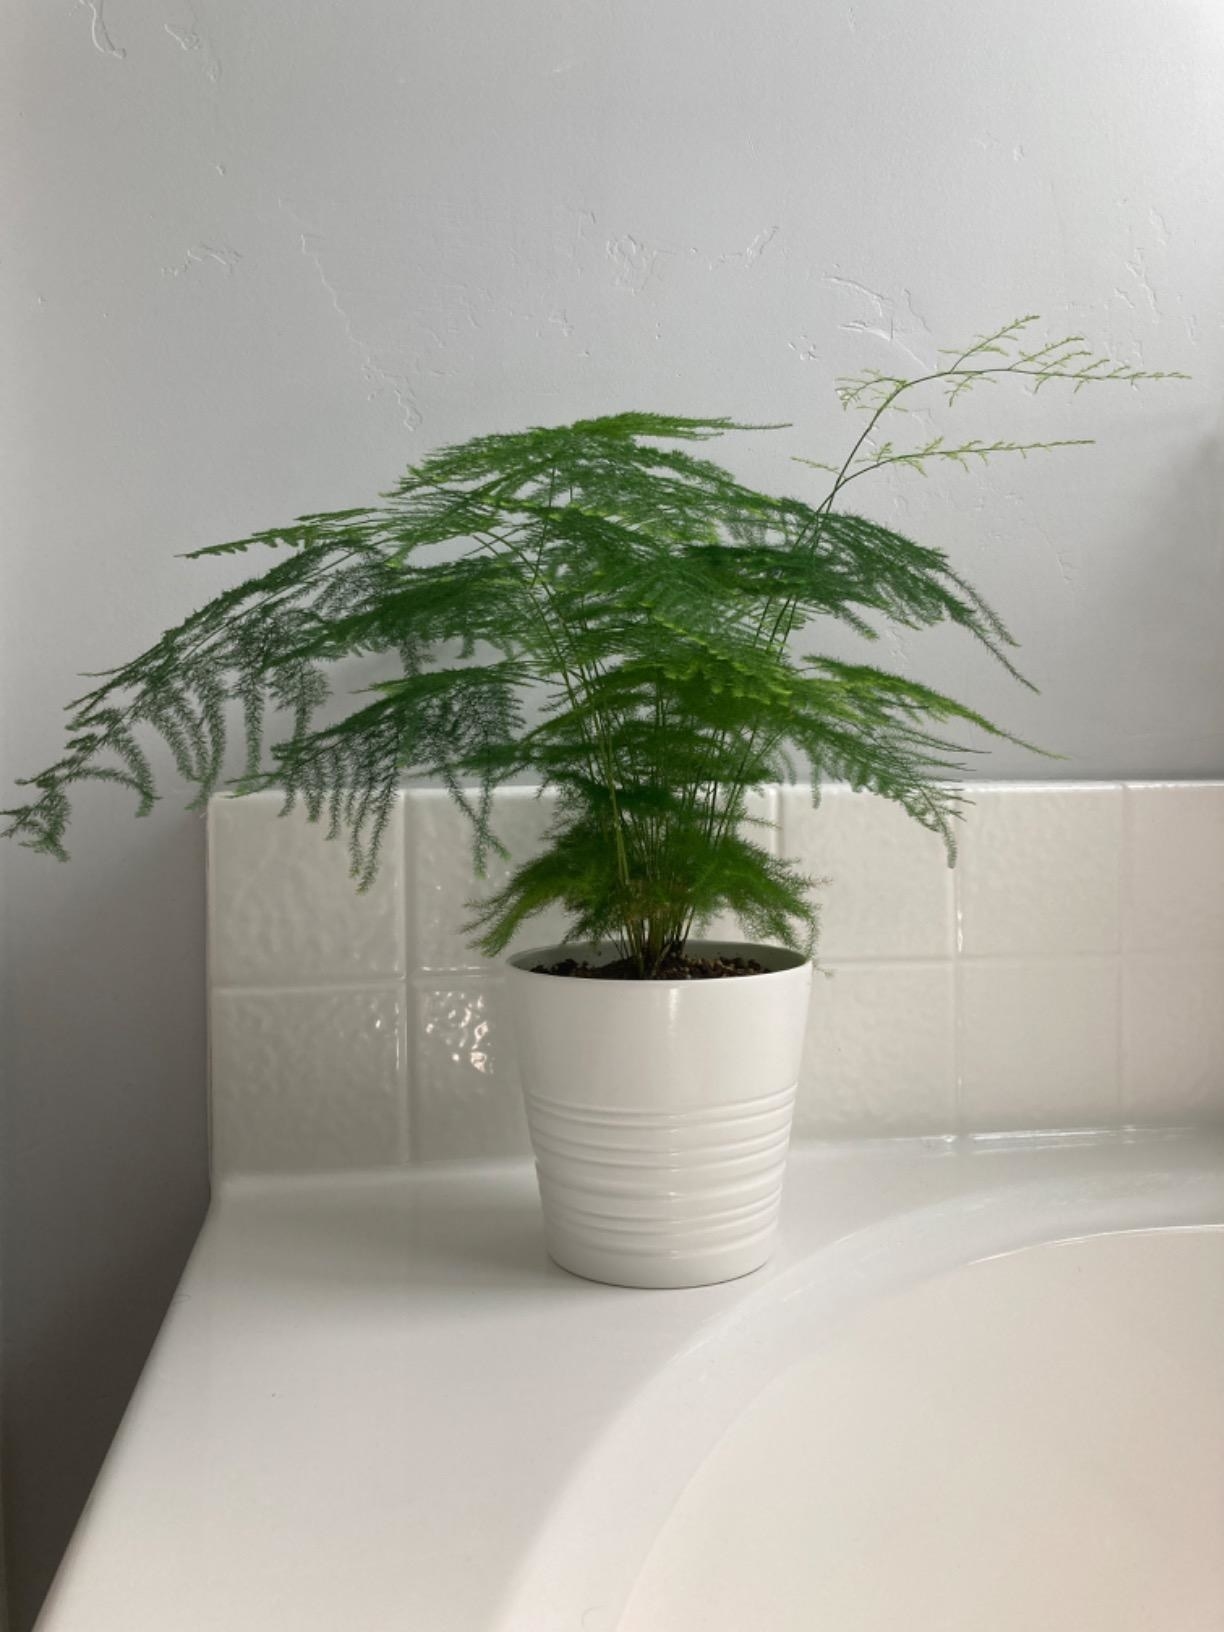 A reviewer showing the fern with super thin, long stems and tiny leaves